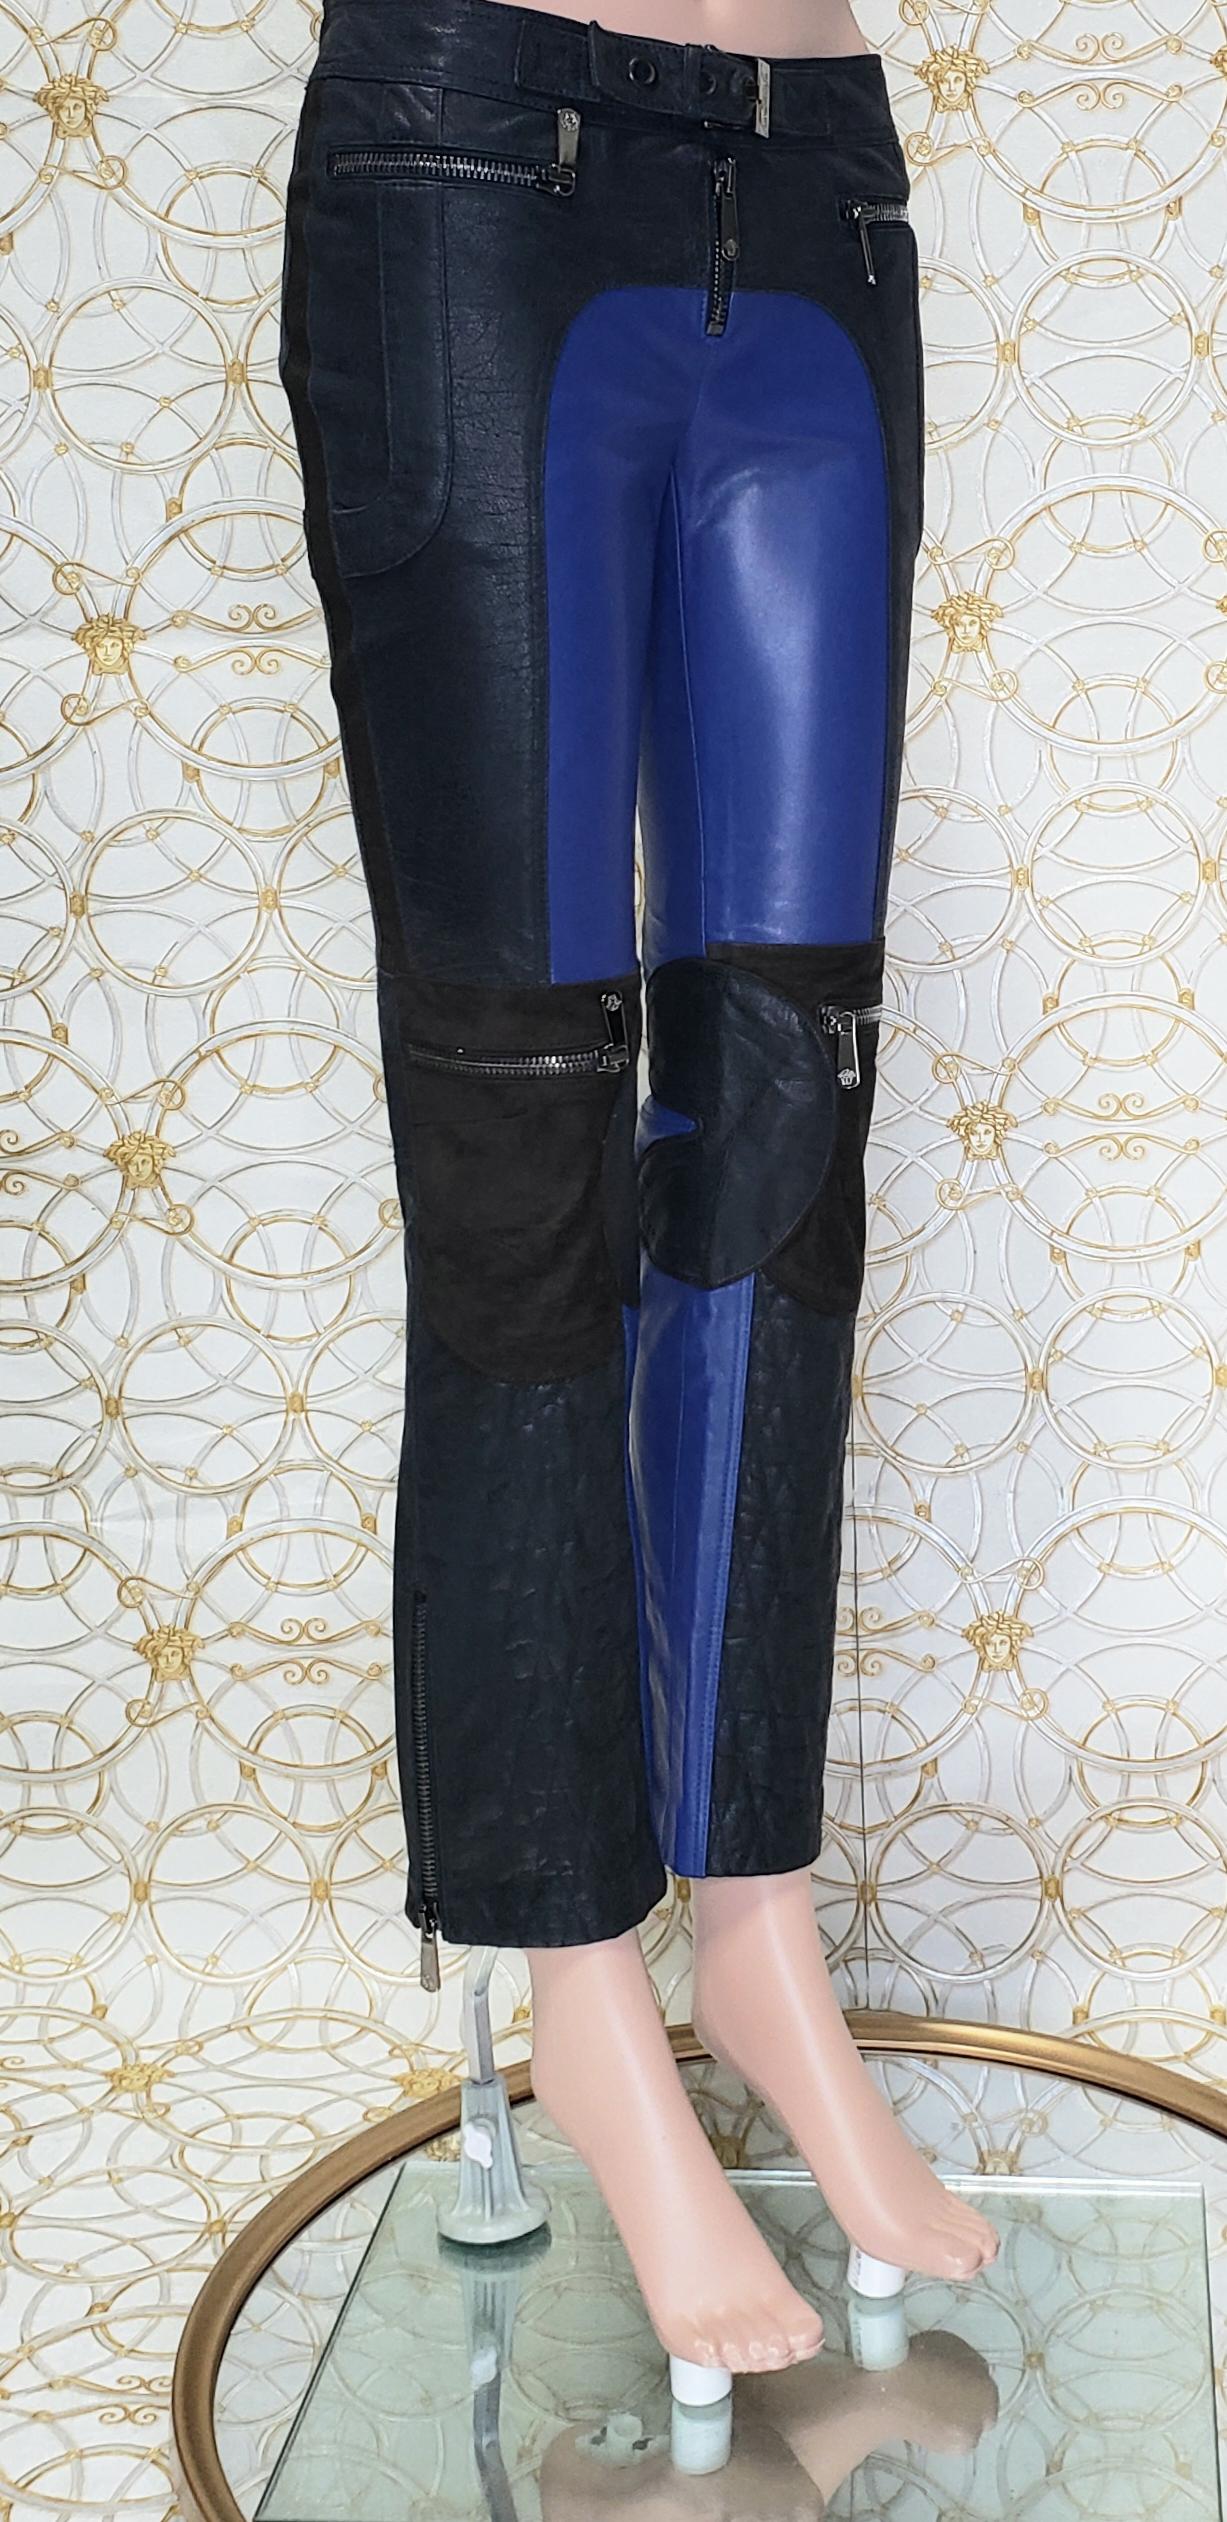 F/W 2010 L #13 VERSACE BLUE and NAVY BLUE MOTORCYCLE LEATHER PANTS size 38 - 2 For Sale 1